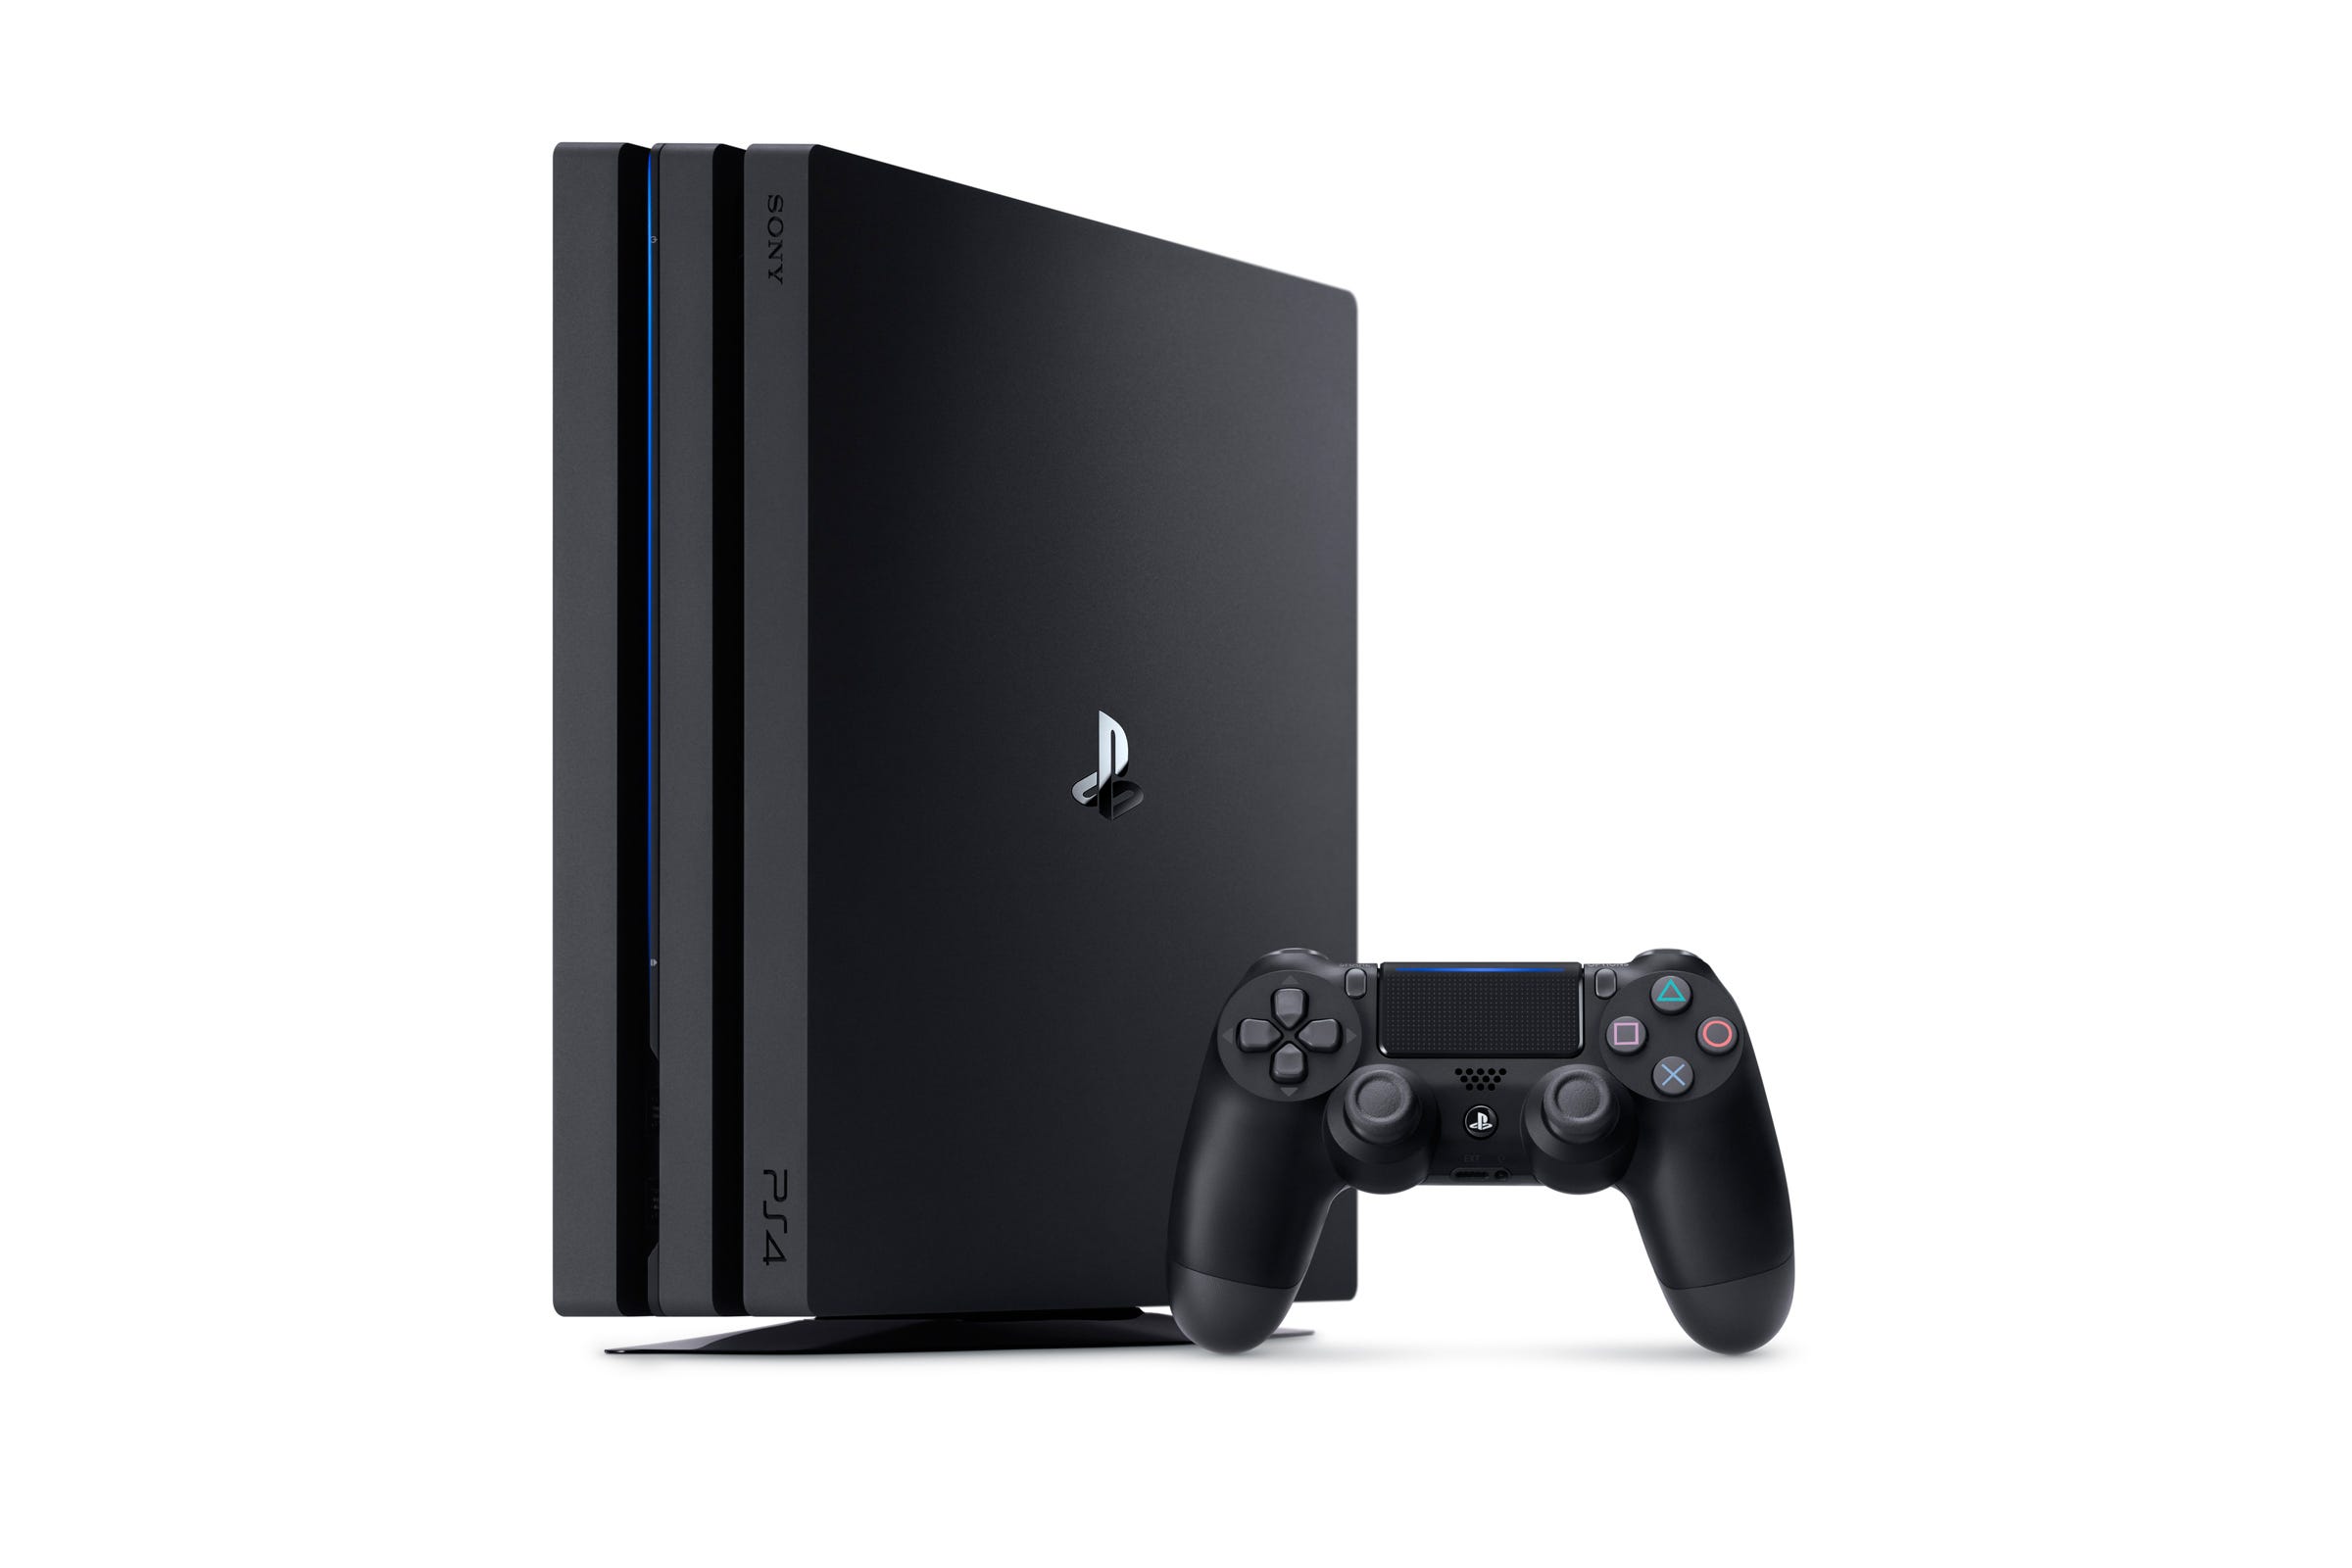 ps4 video game sales